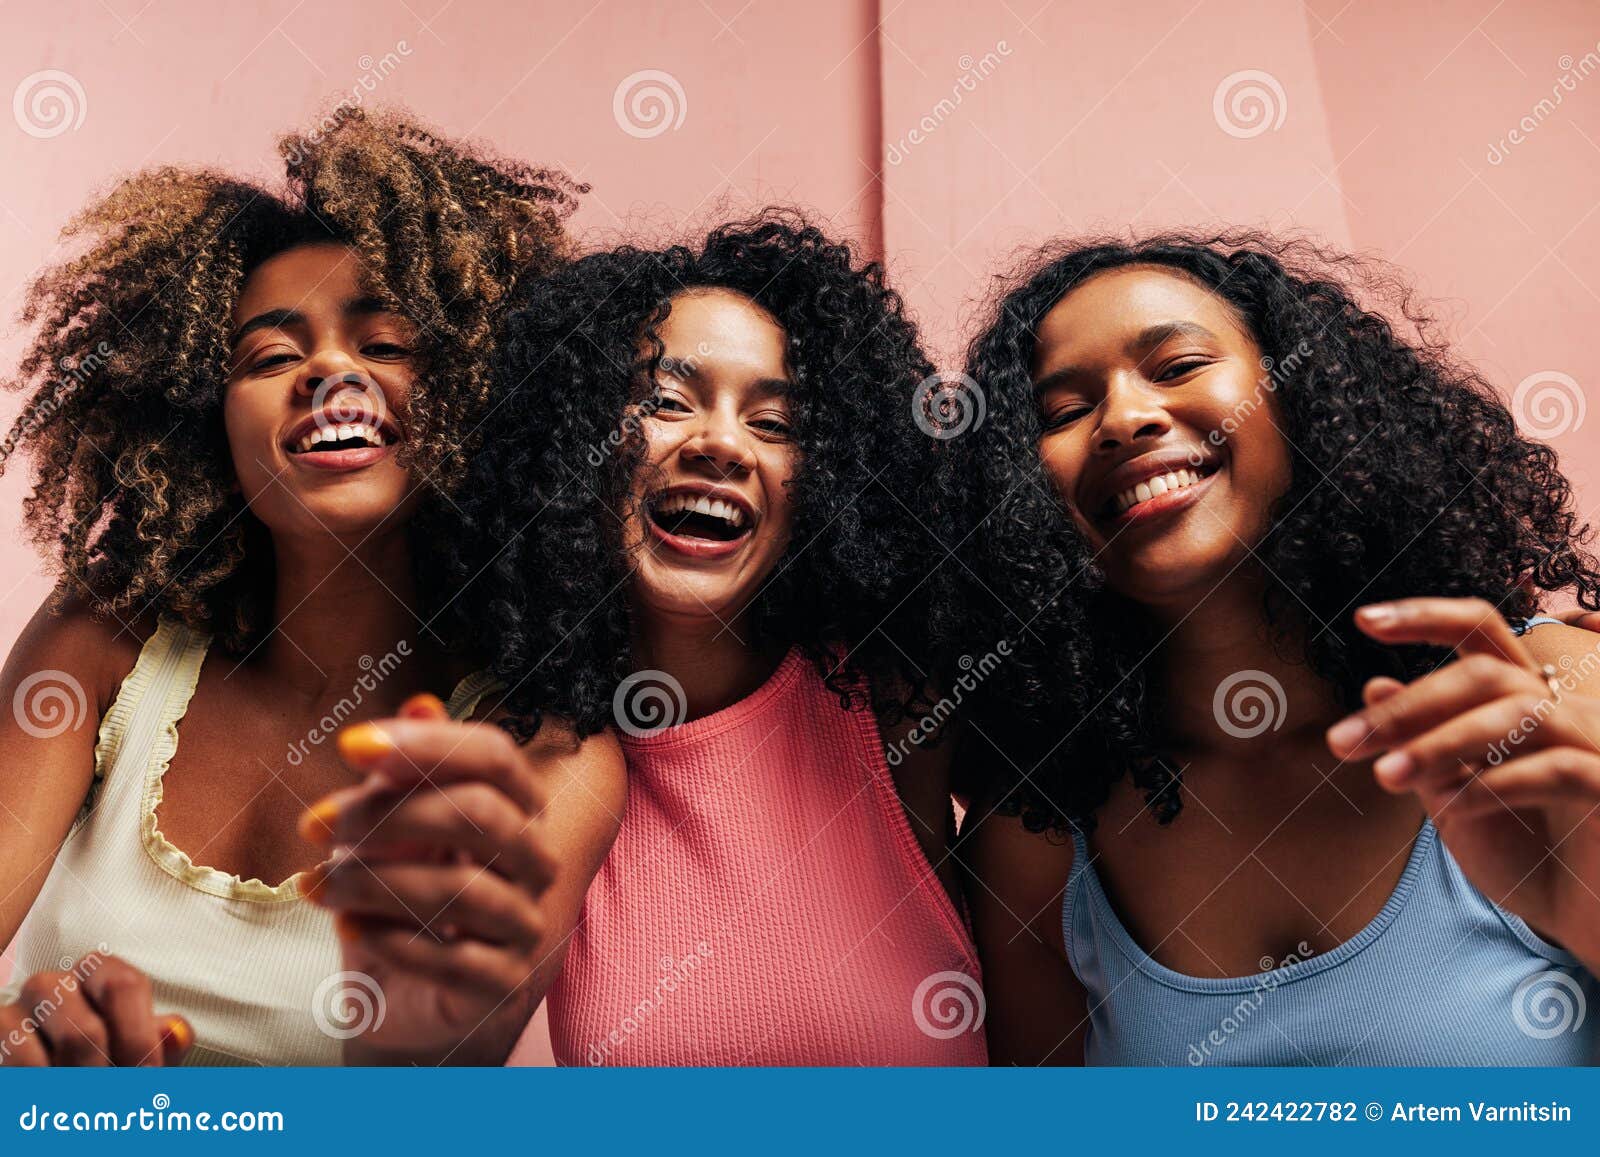 Three Happy Girlfriends with Curly Hair Laughing Together and Looking ...